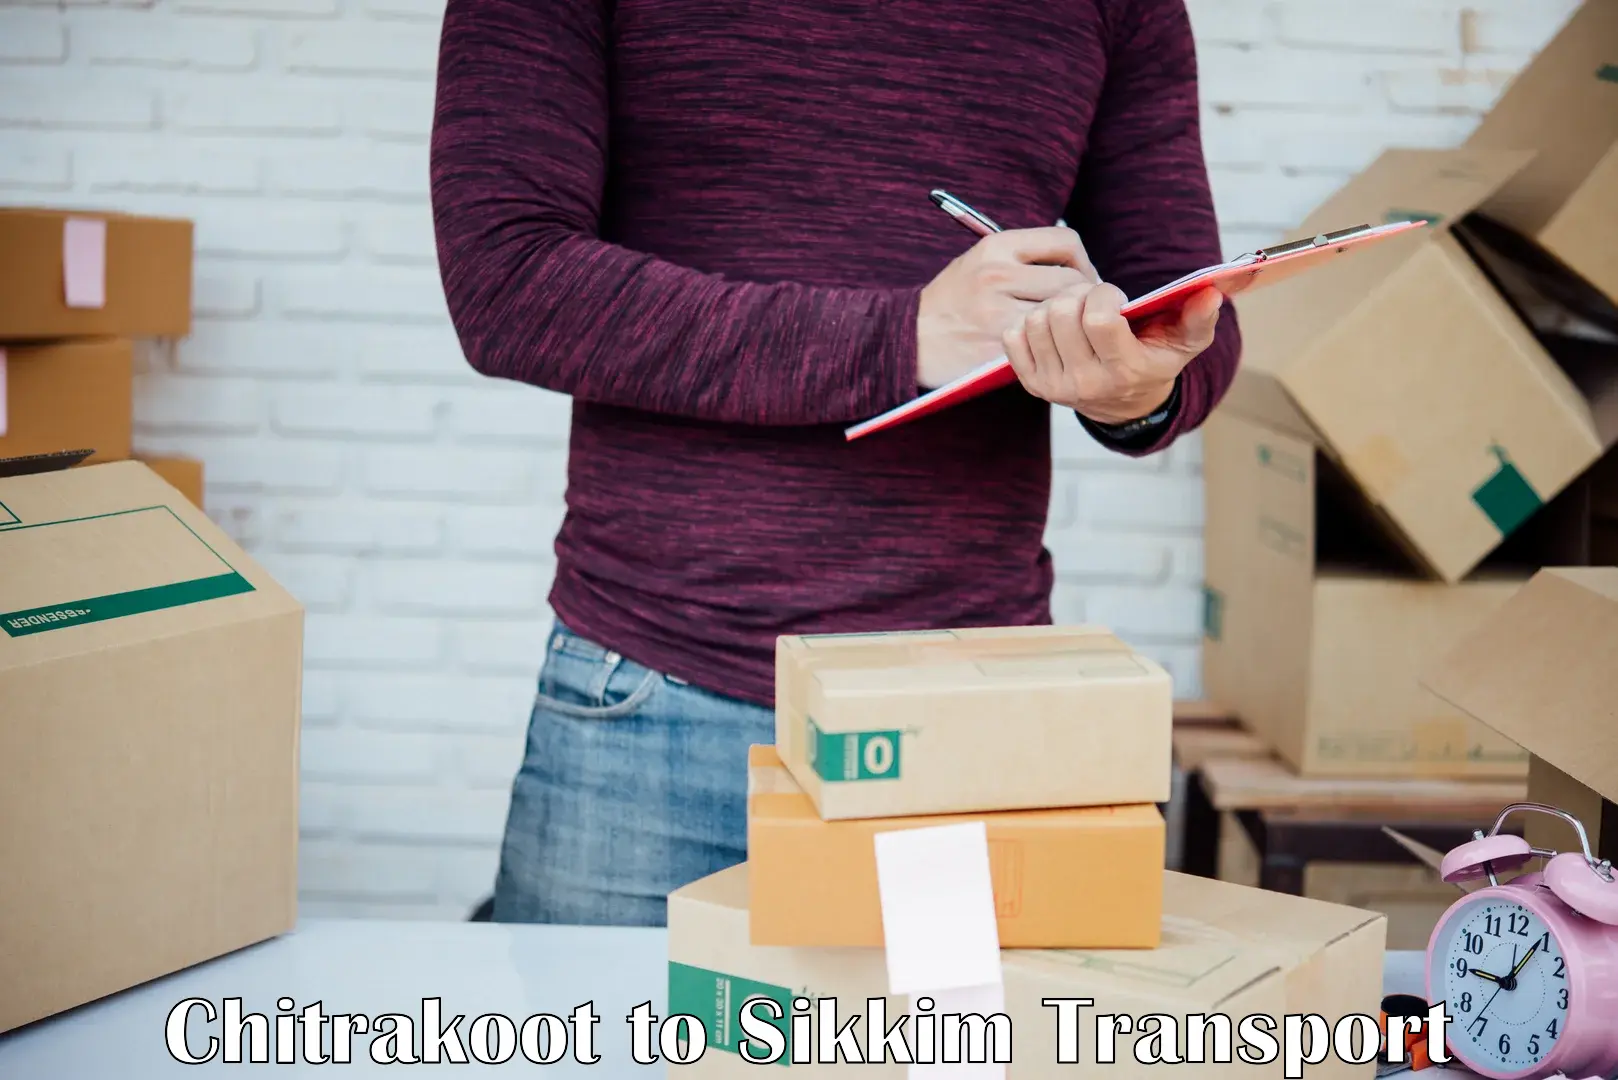 Pick up transport service Chitrakoot to East Sikkim